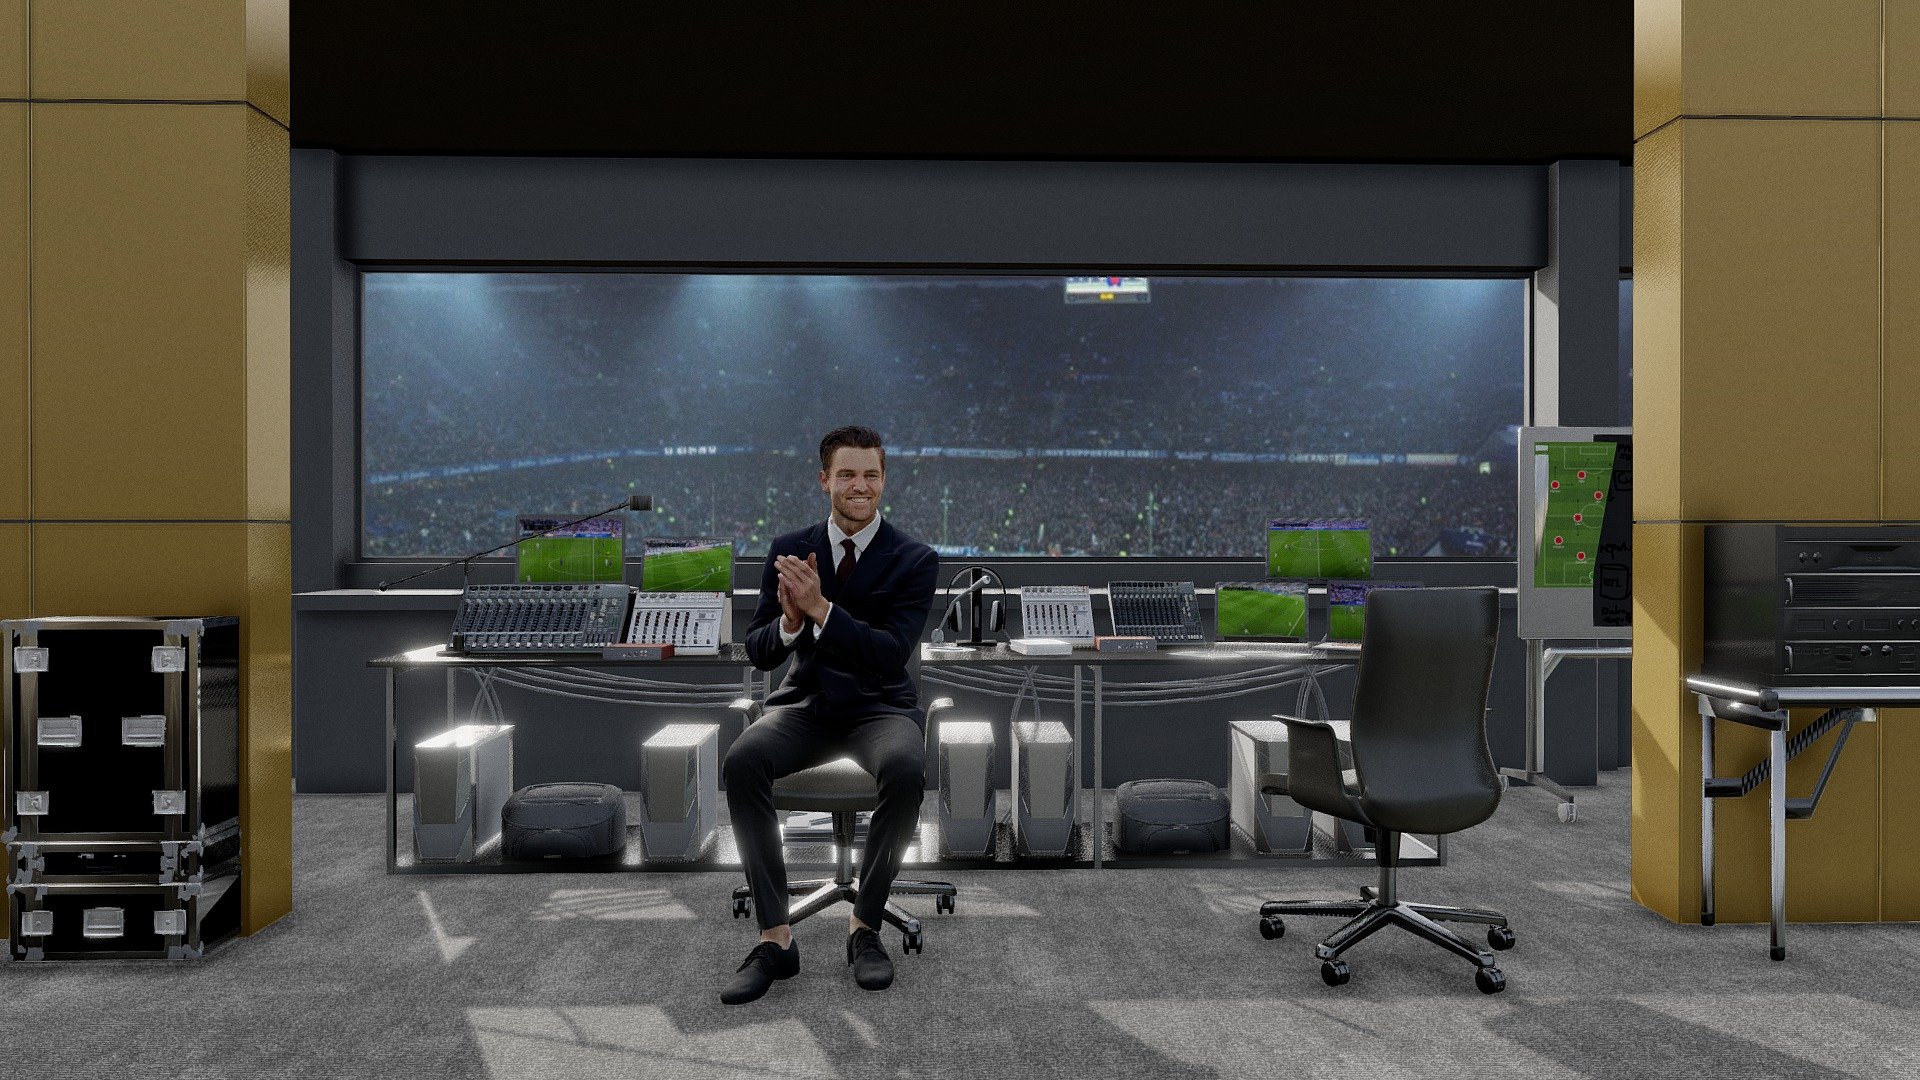 There will be no celebrities or any guests in the commentary box during the game 3d model